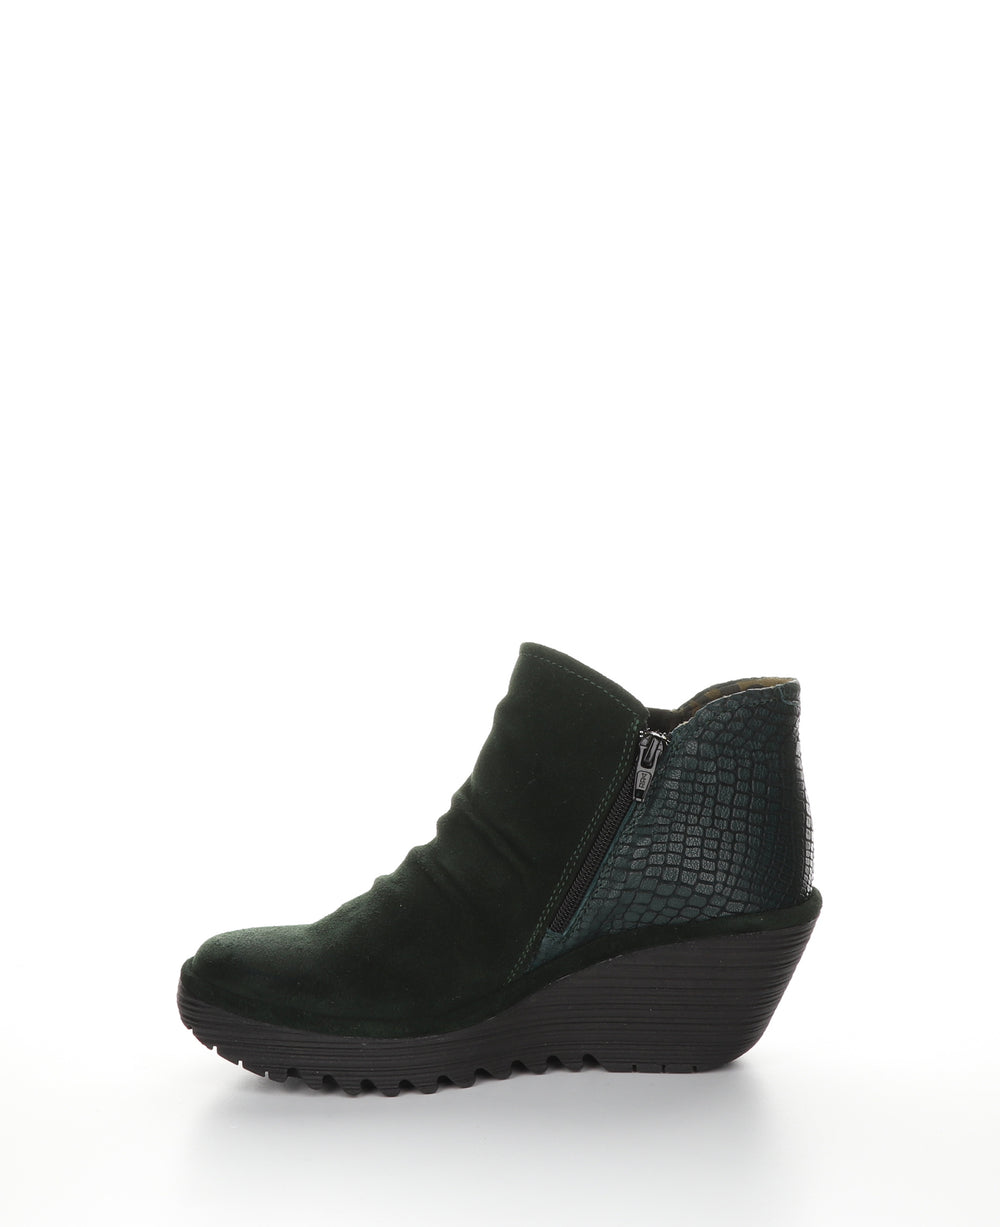 YAMY266FLY Green Forest Zip Up Ankle Boots|YAMY266FLY Bottines avec Fermeture Zippée in Vert